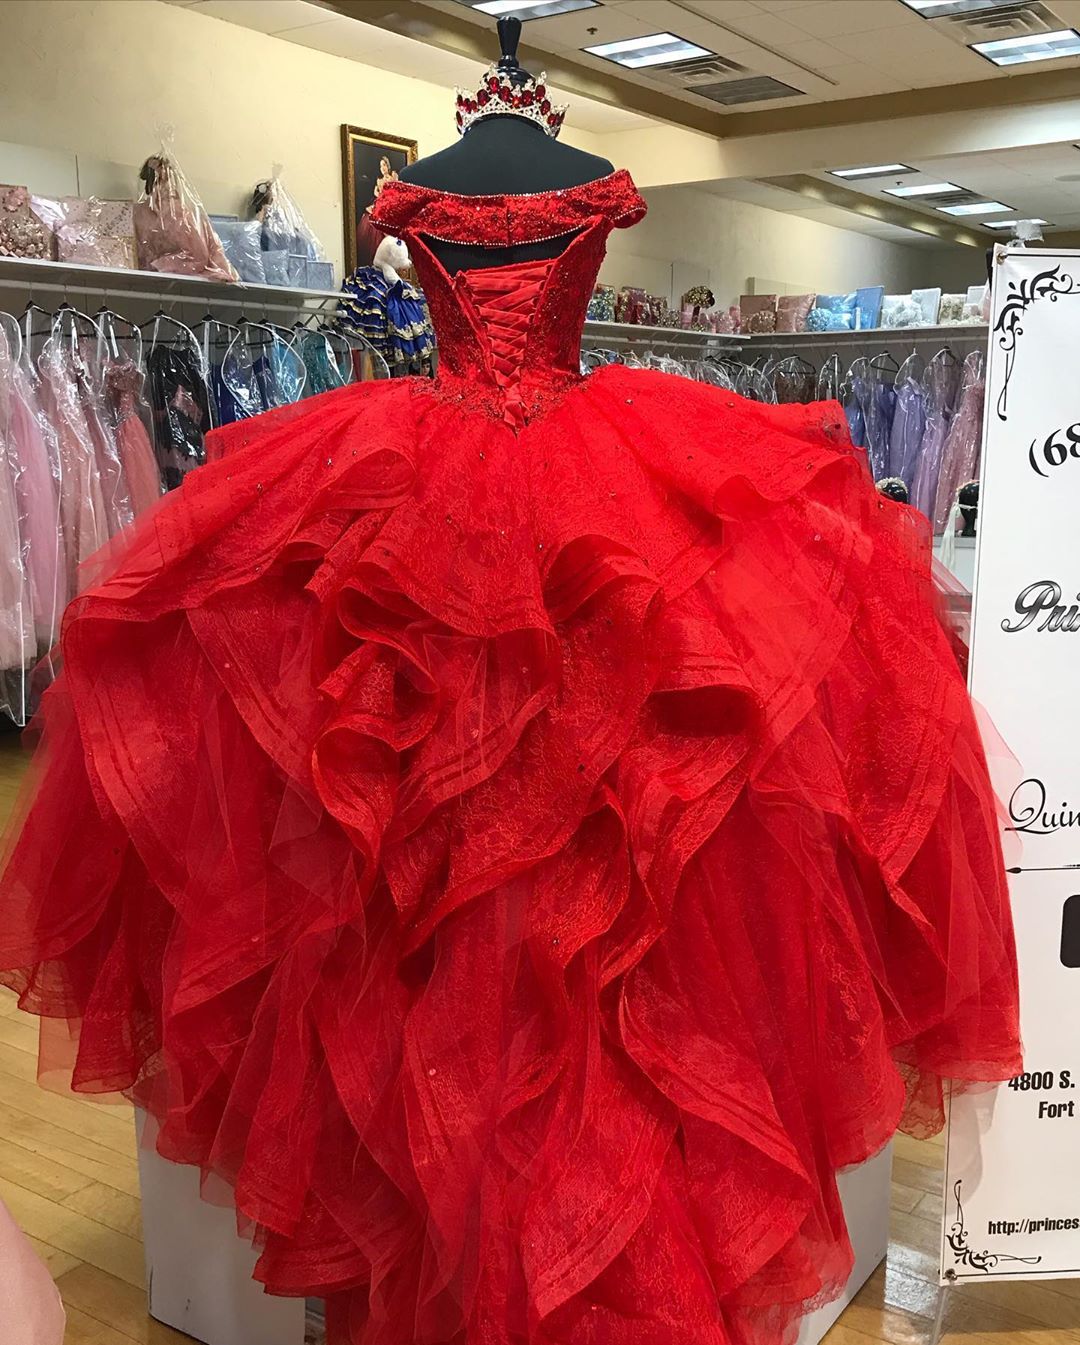 red modern quinceanera dress,red quineanera dress,off the shoulder quinceanera dress,ruffled skirt quinceanera dress,scoop neckline quinceanera dress,custom make your quinceanera dress,